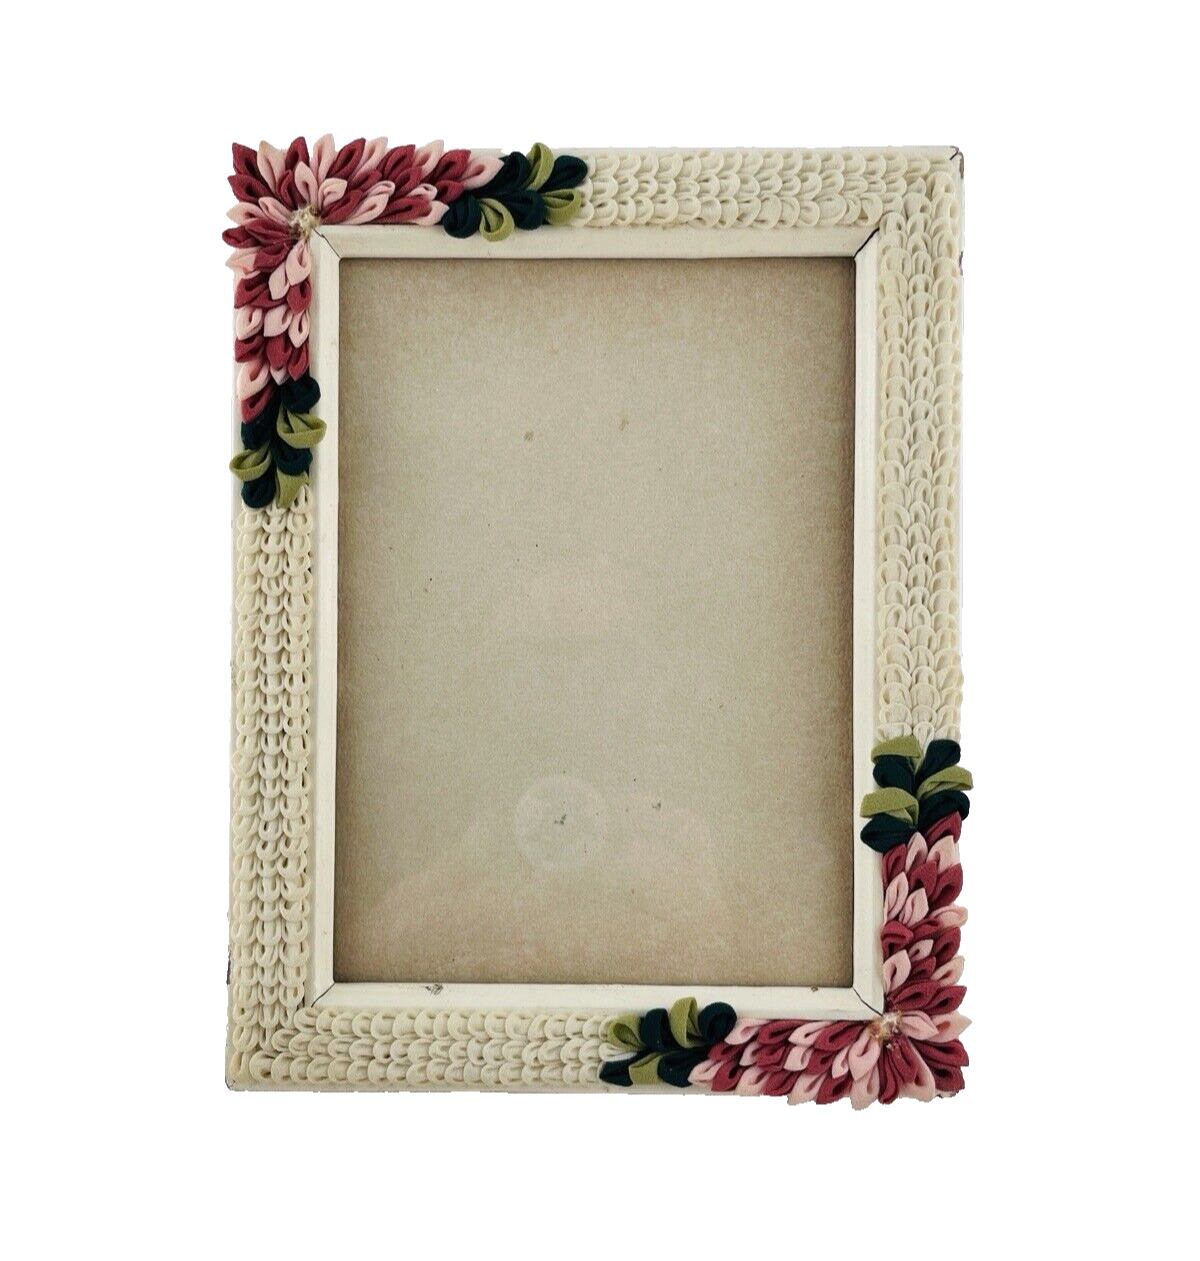 Antique VTG Painted White Wood Picture Frame Ribbon Floral Embellishments Signed